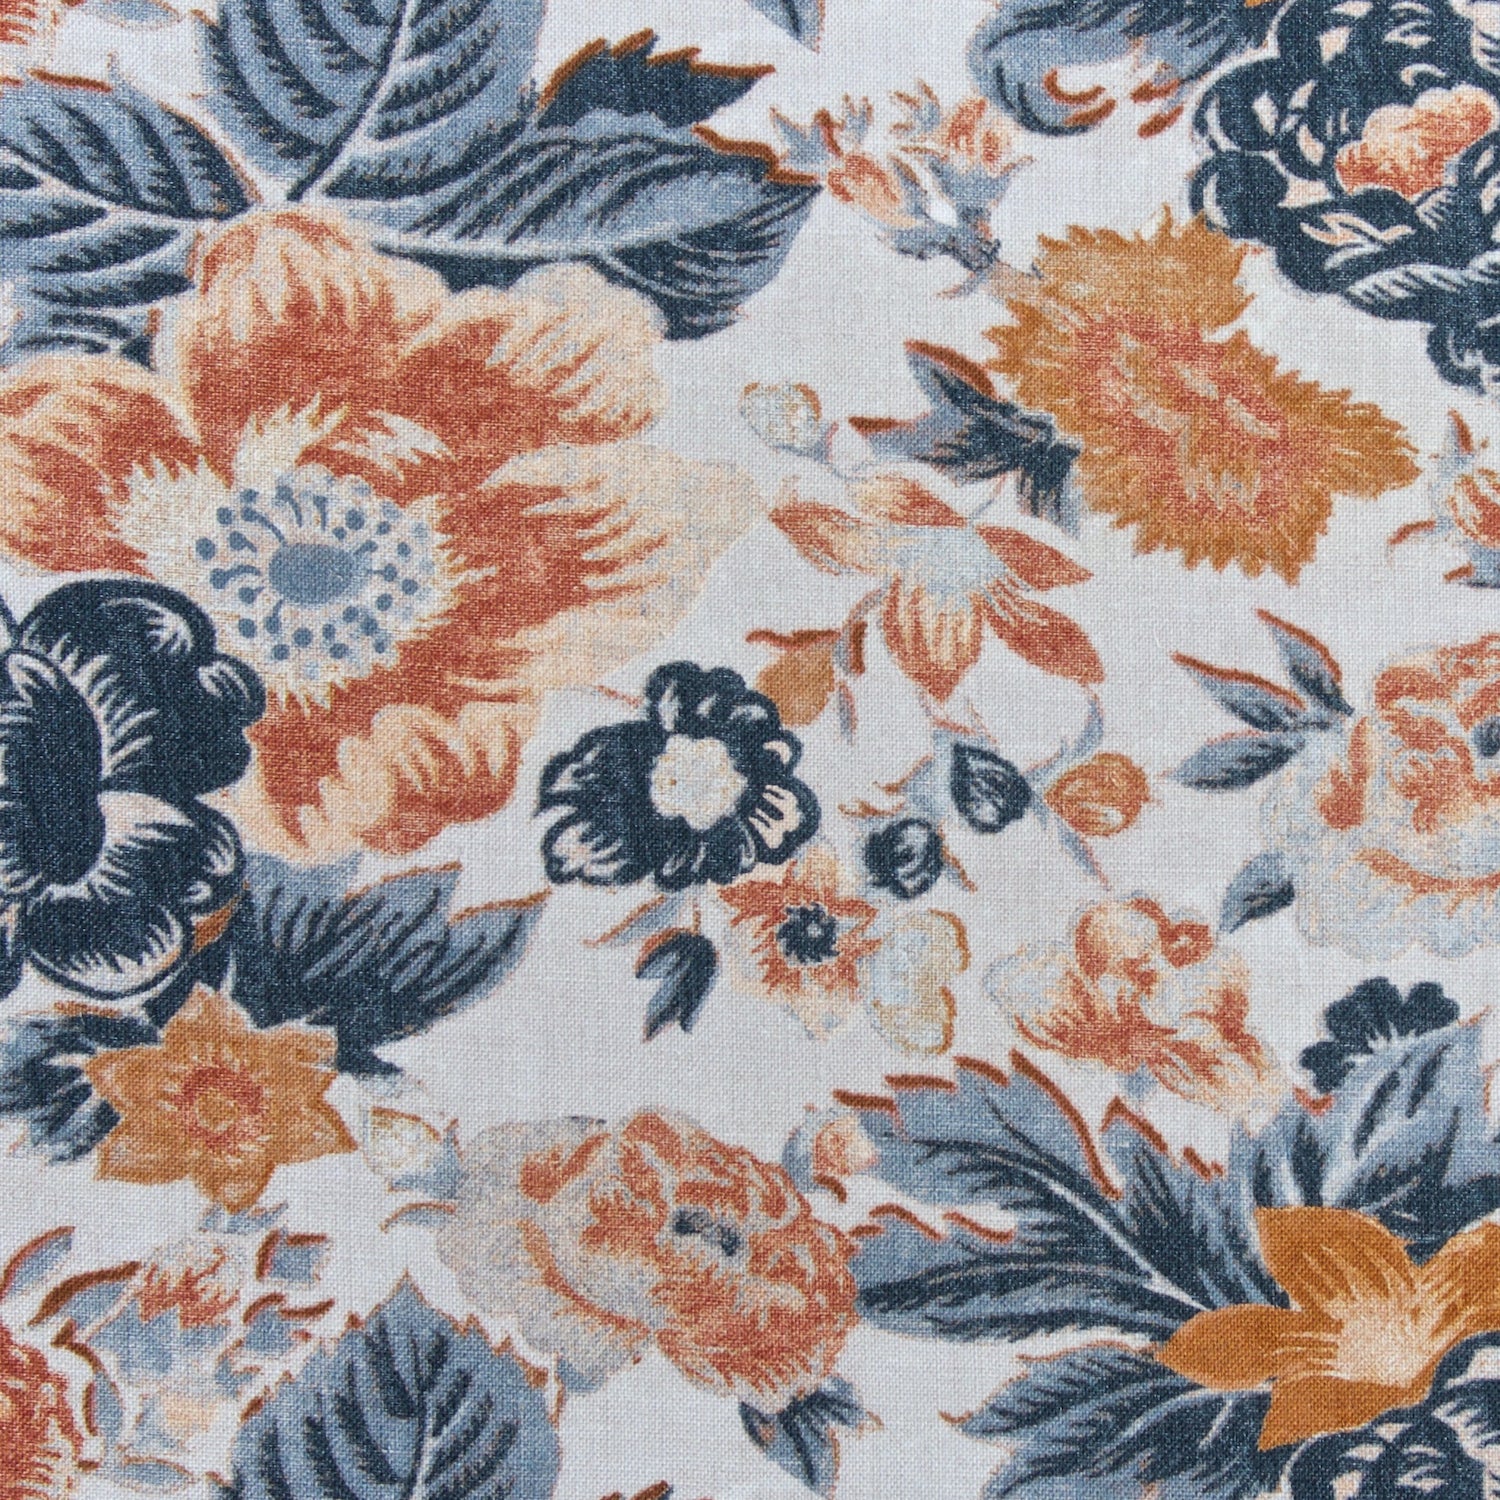 Detail of a linen fabric in a detailed floral pattern in shades of blue and orange on a cream field.